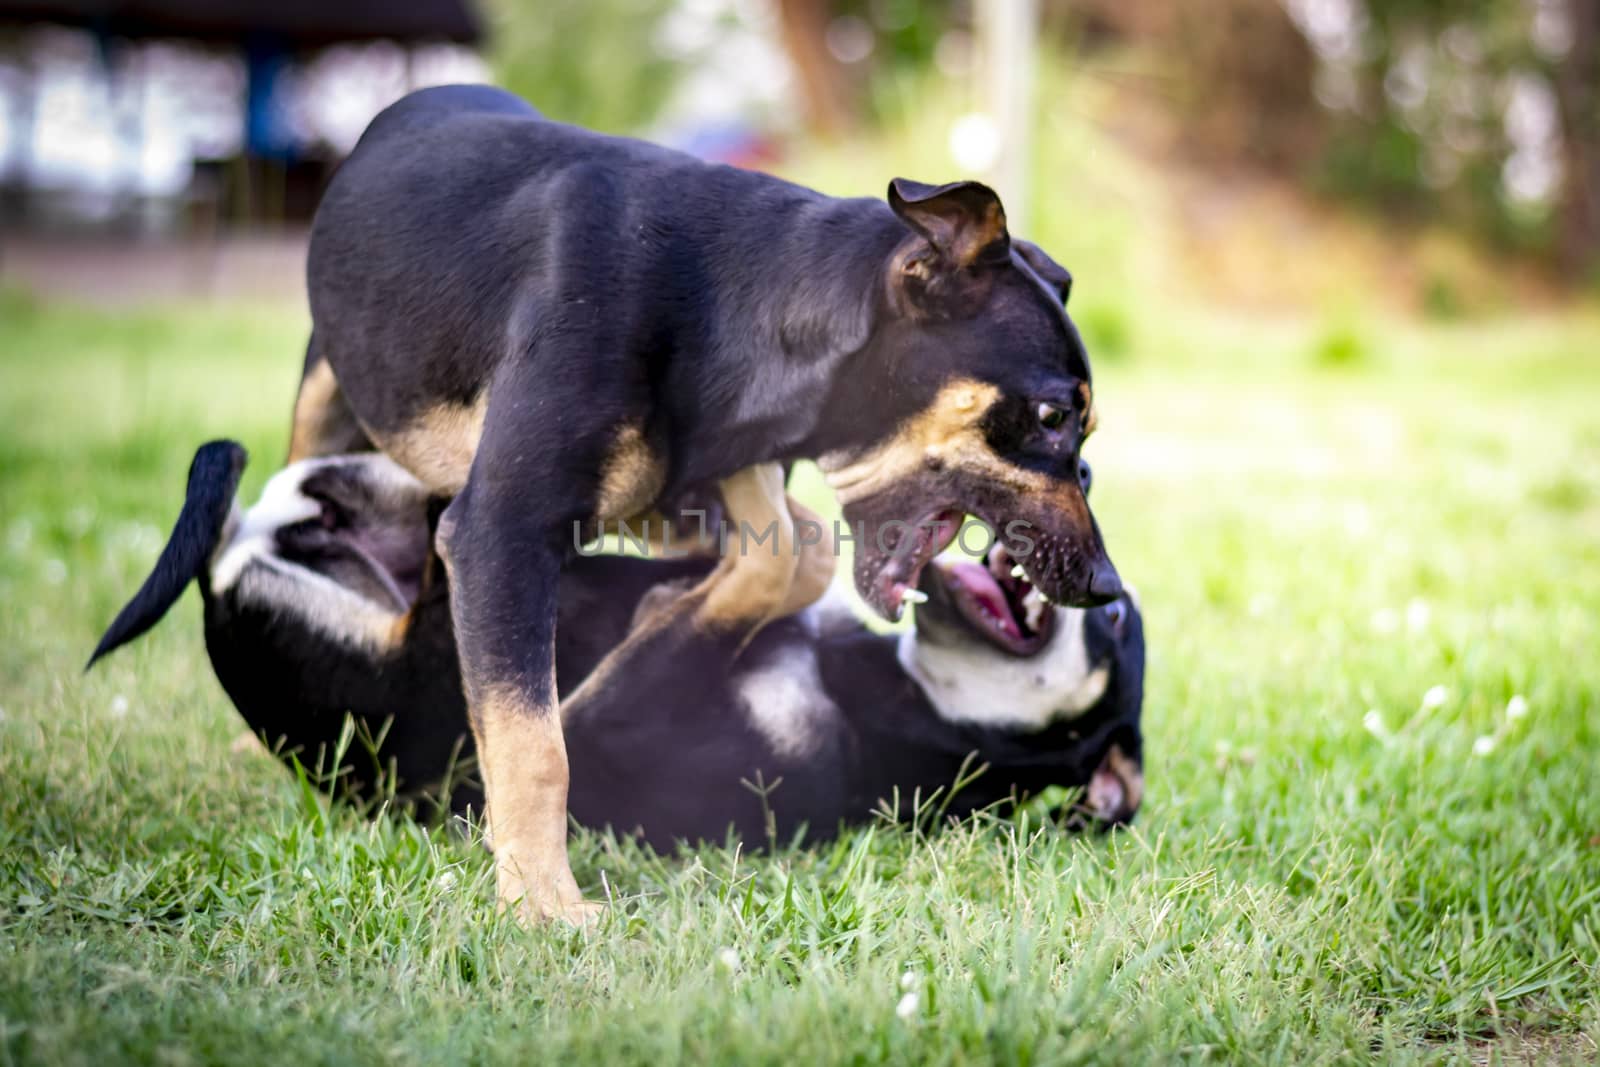 Two playful Beauceron dogs playing in the grass, on on top of the other